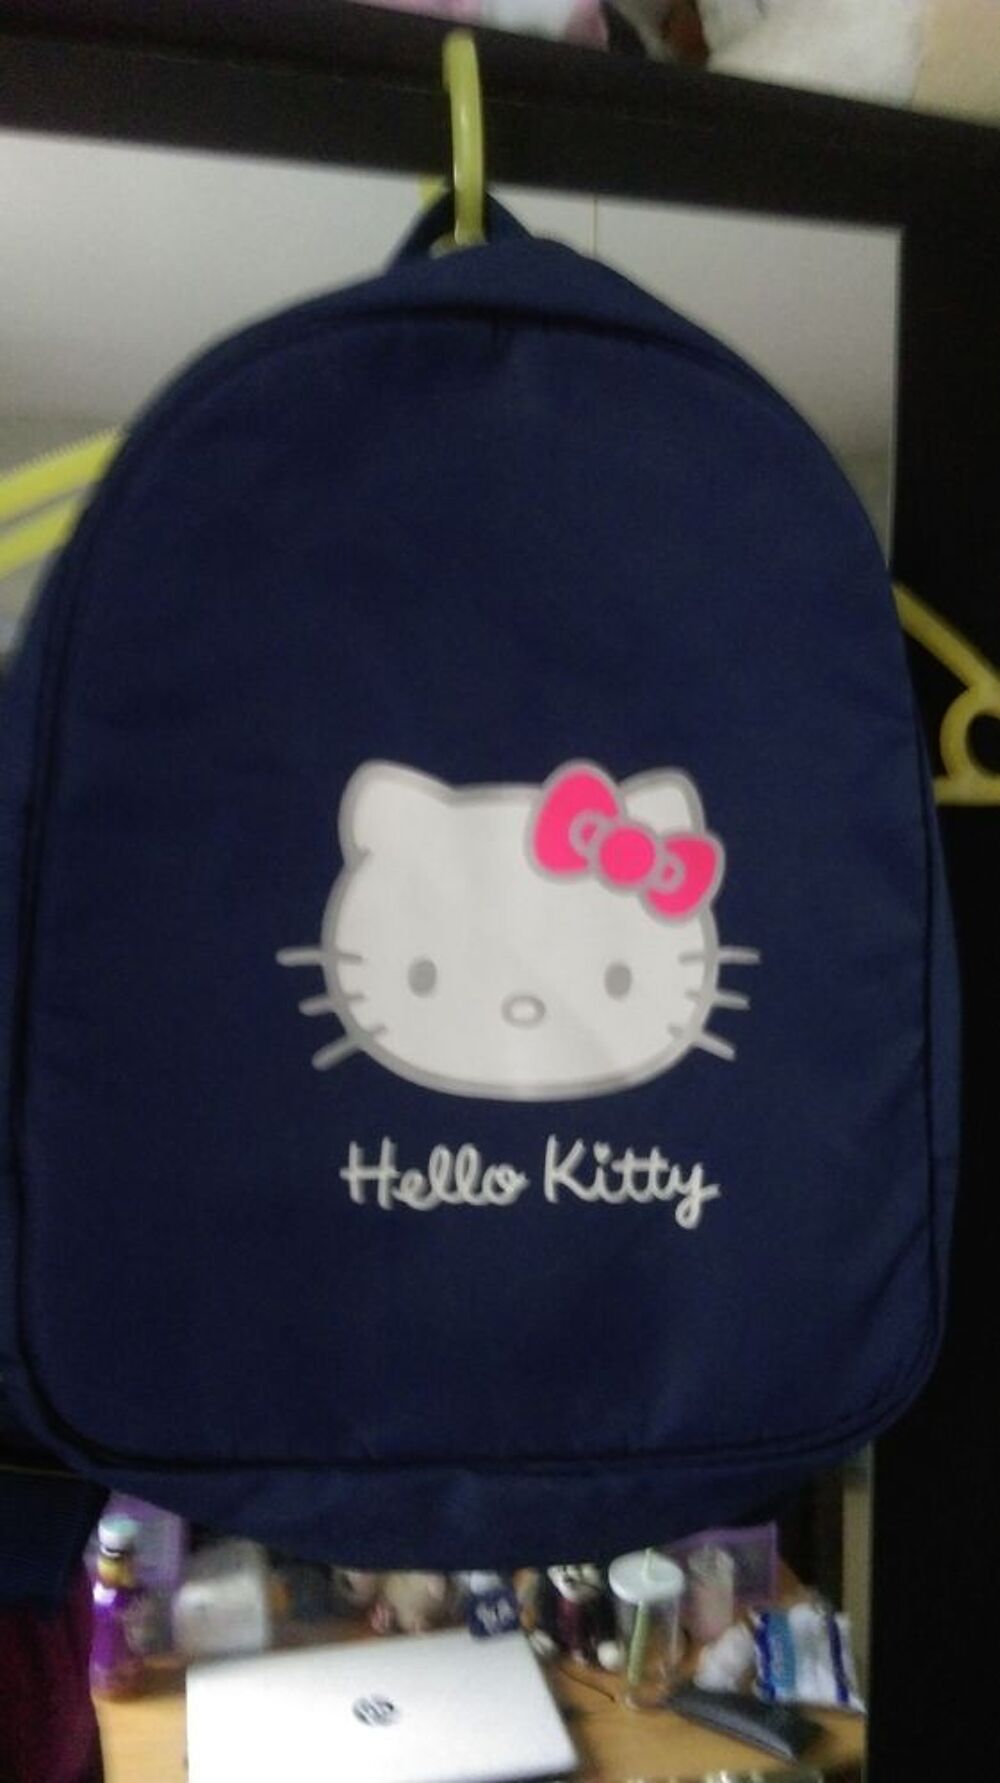 Petits sacs &agrave; dos HELLO KITTY Maroquinerie